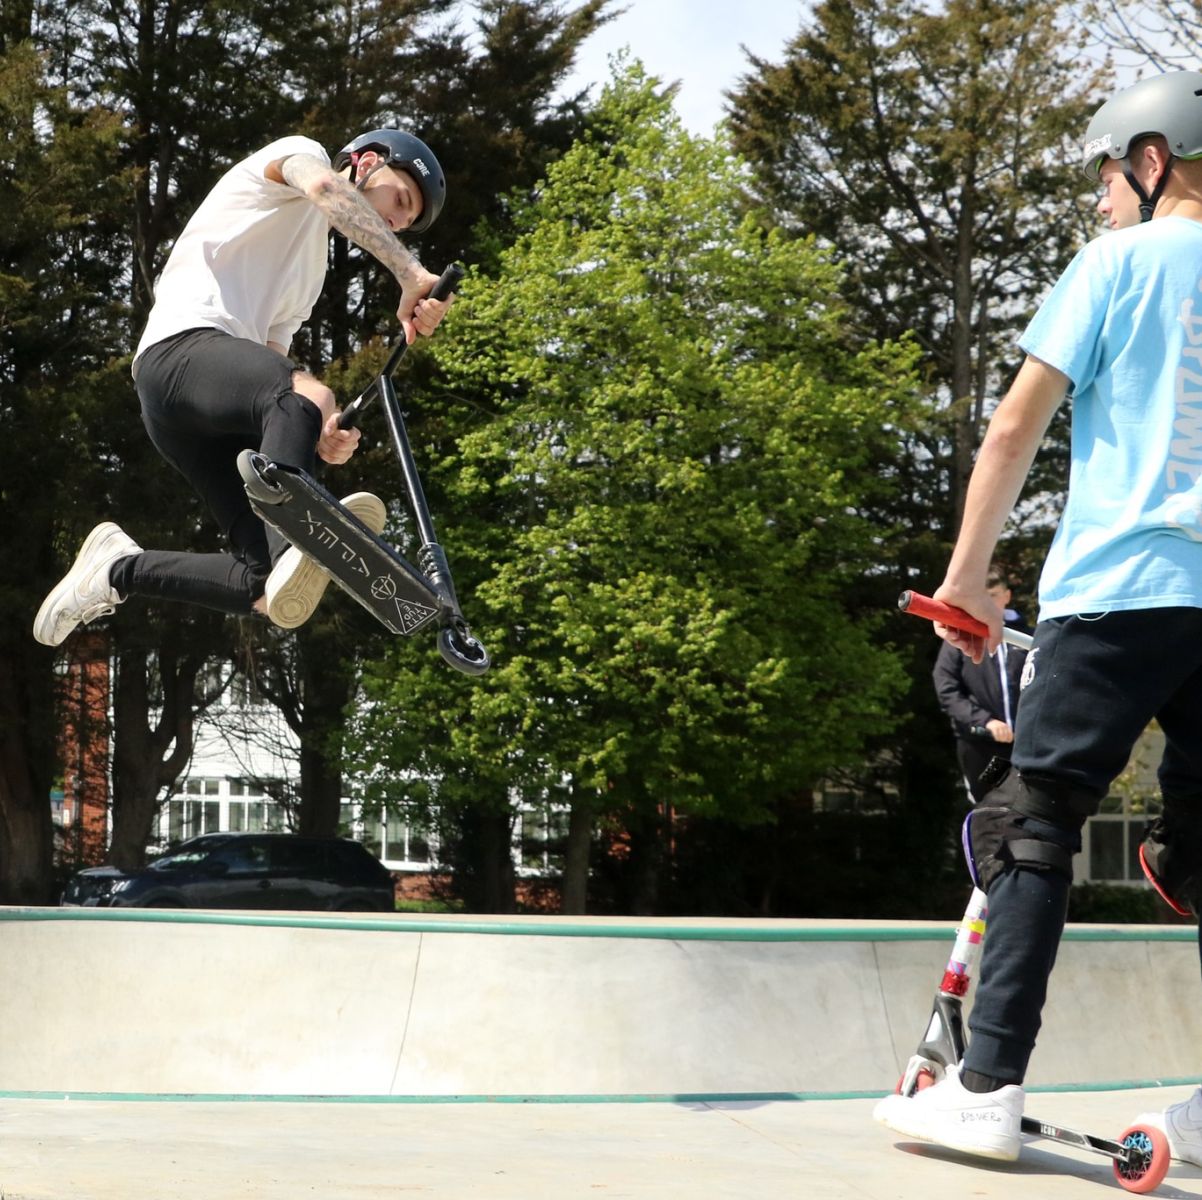 Young people doing stunts on scooters at Leiston Skate Park Suffolk